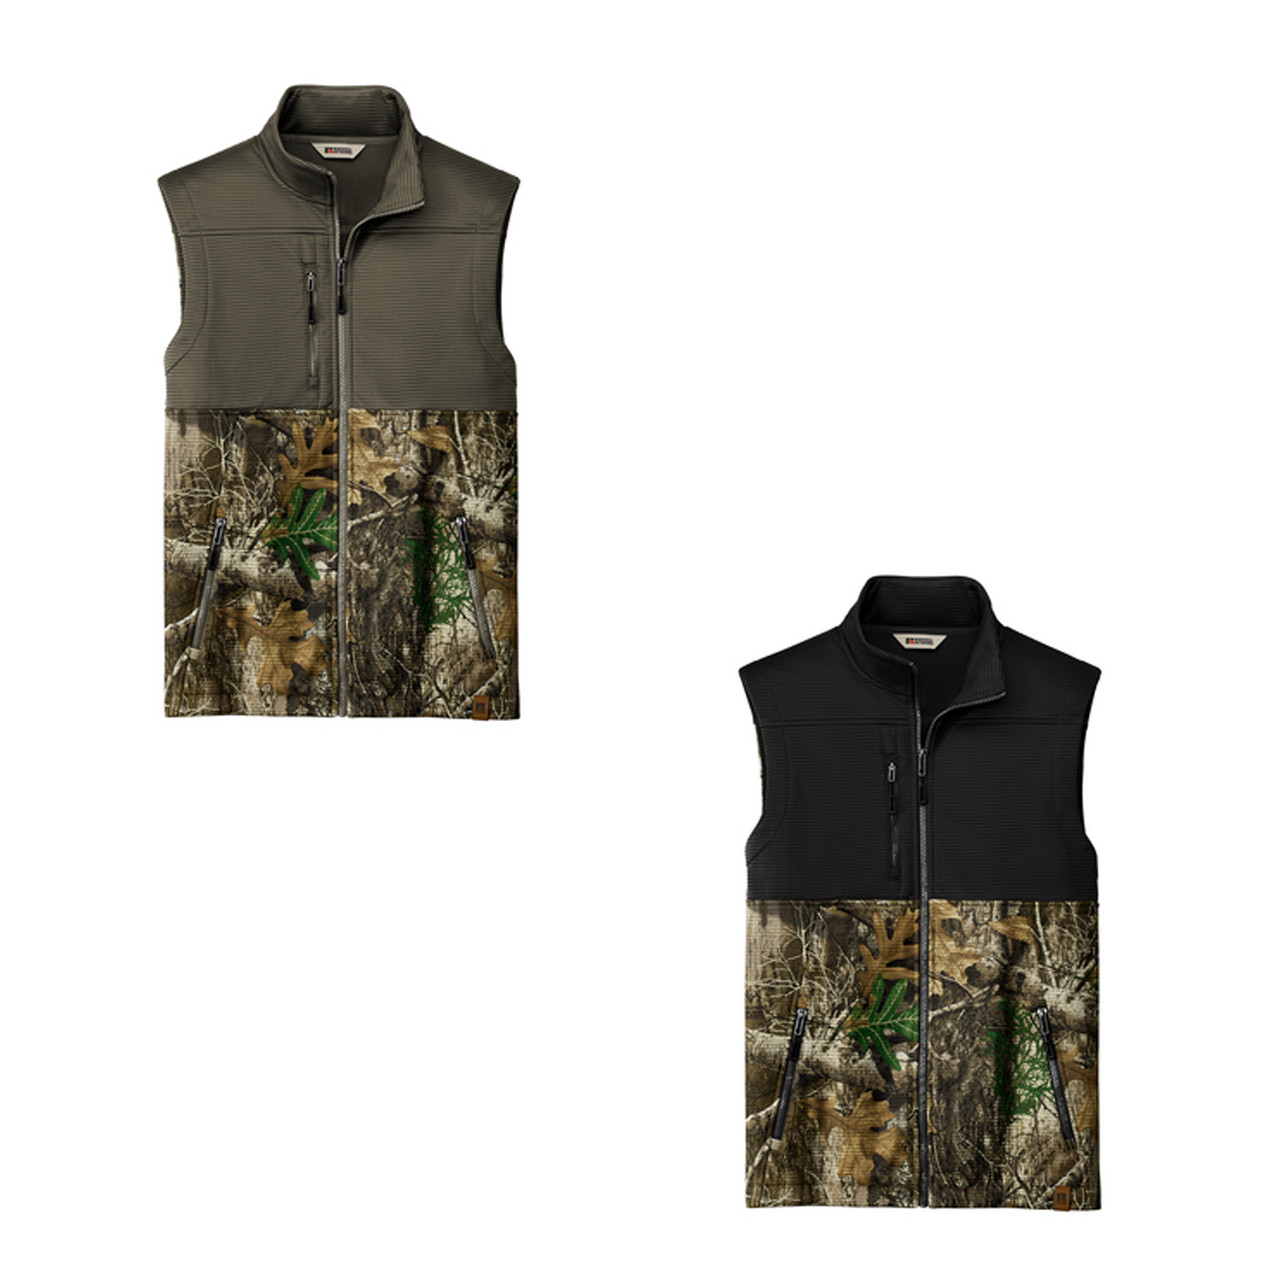 Russell Outdoors™ Camo Soft Shell Vest - Men's** (Restrictions Apply - see description)